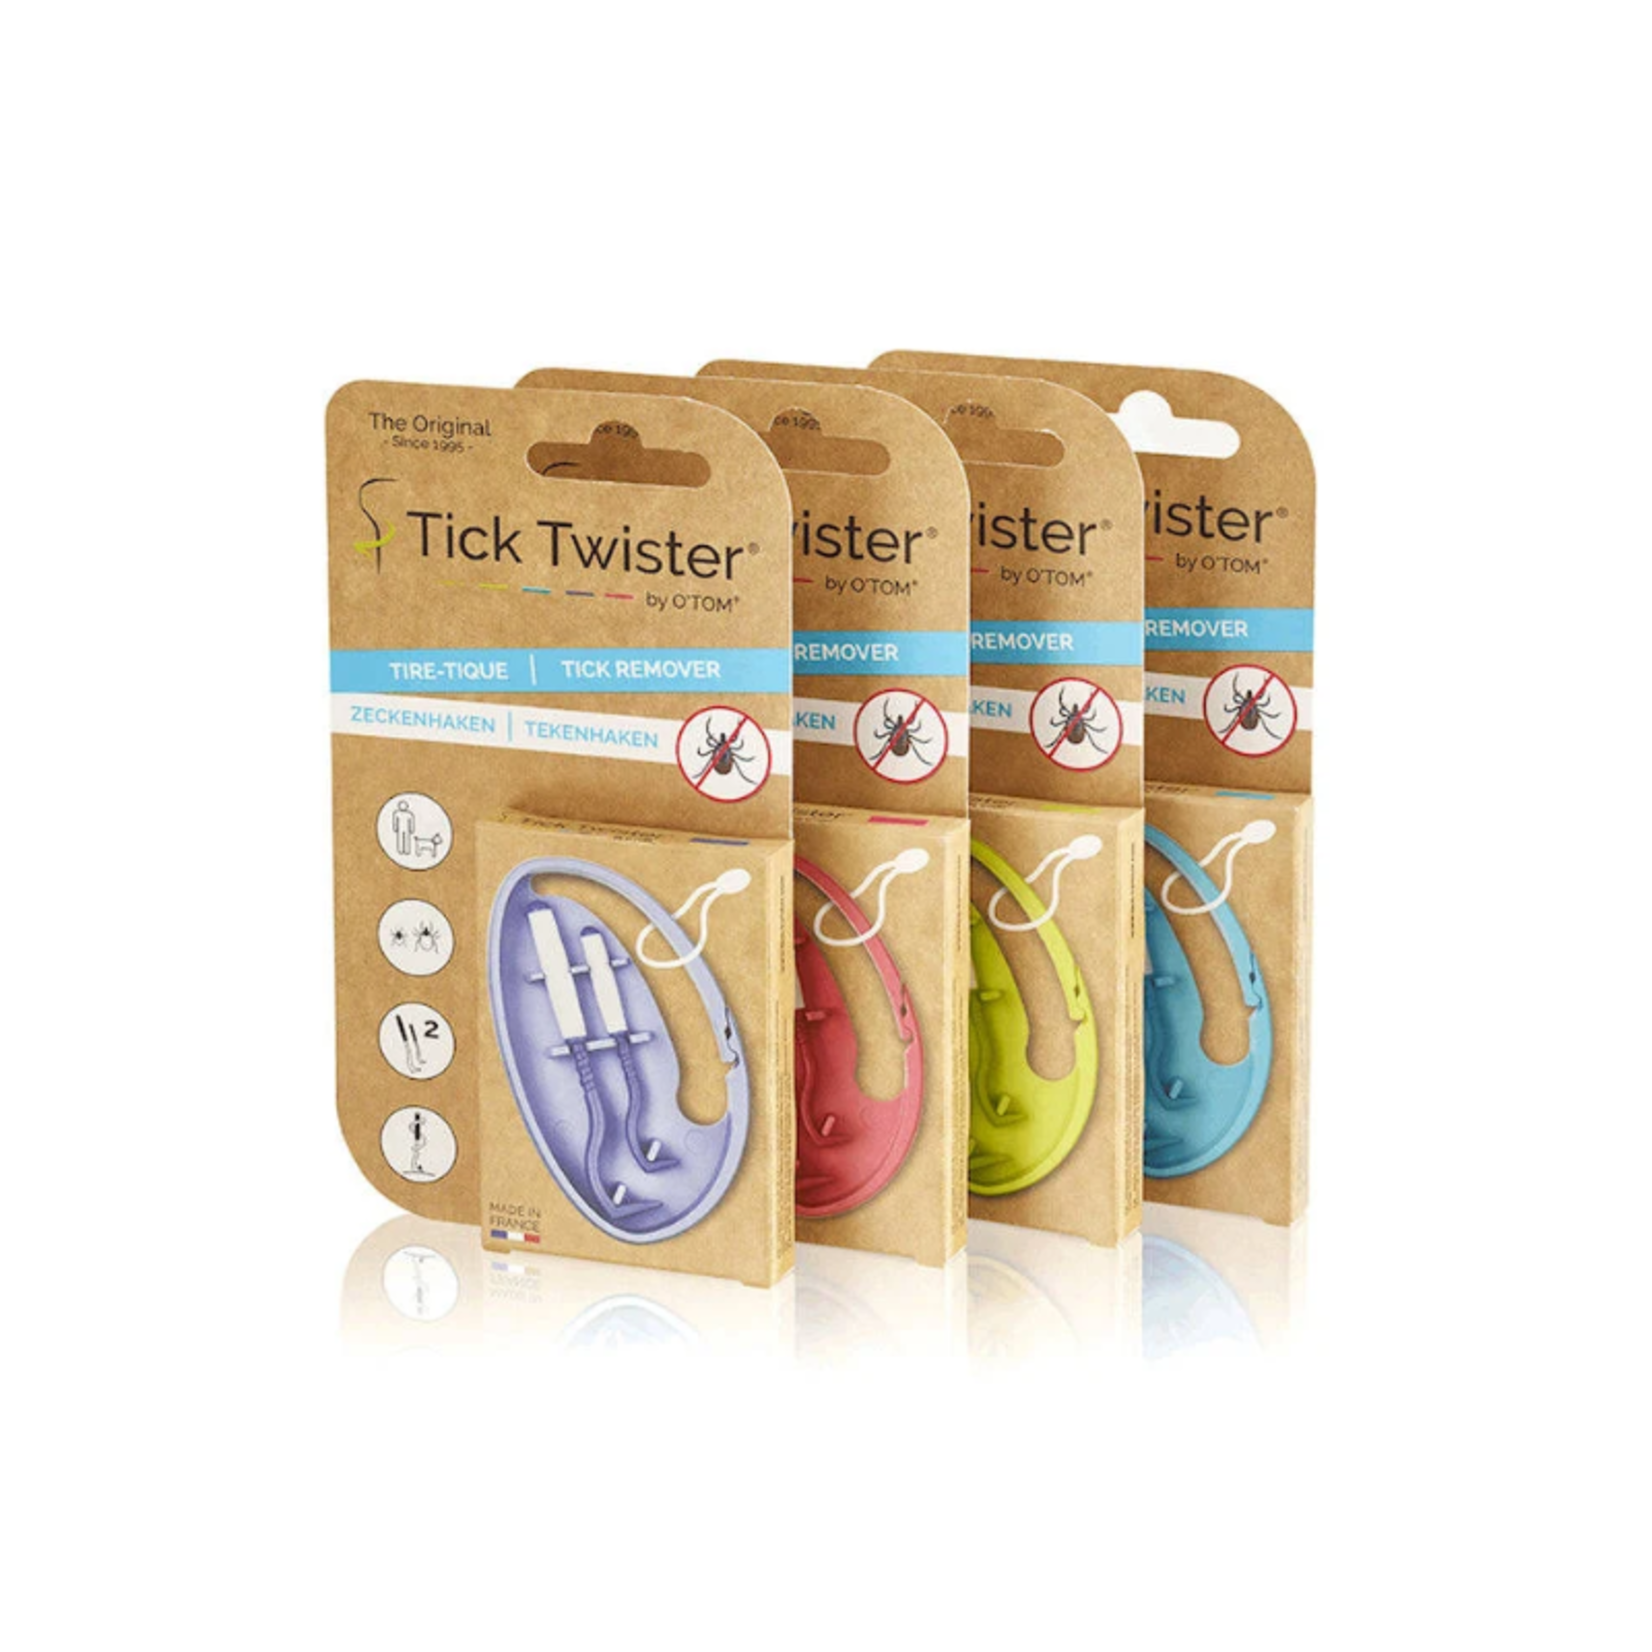 Tick Twister® by O'Tom with Clip Case - Packaged